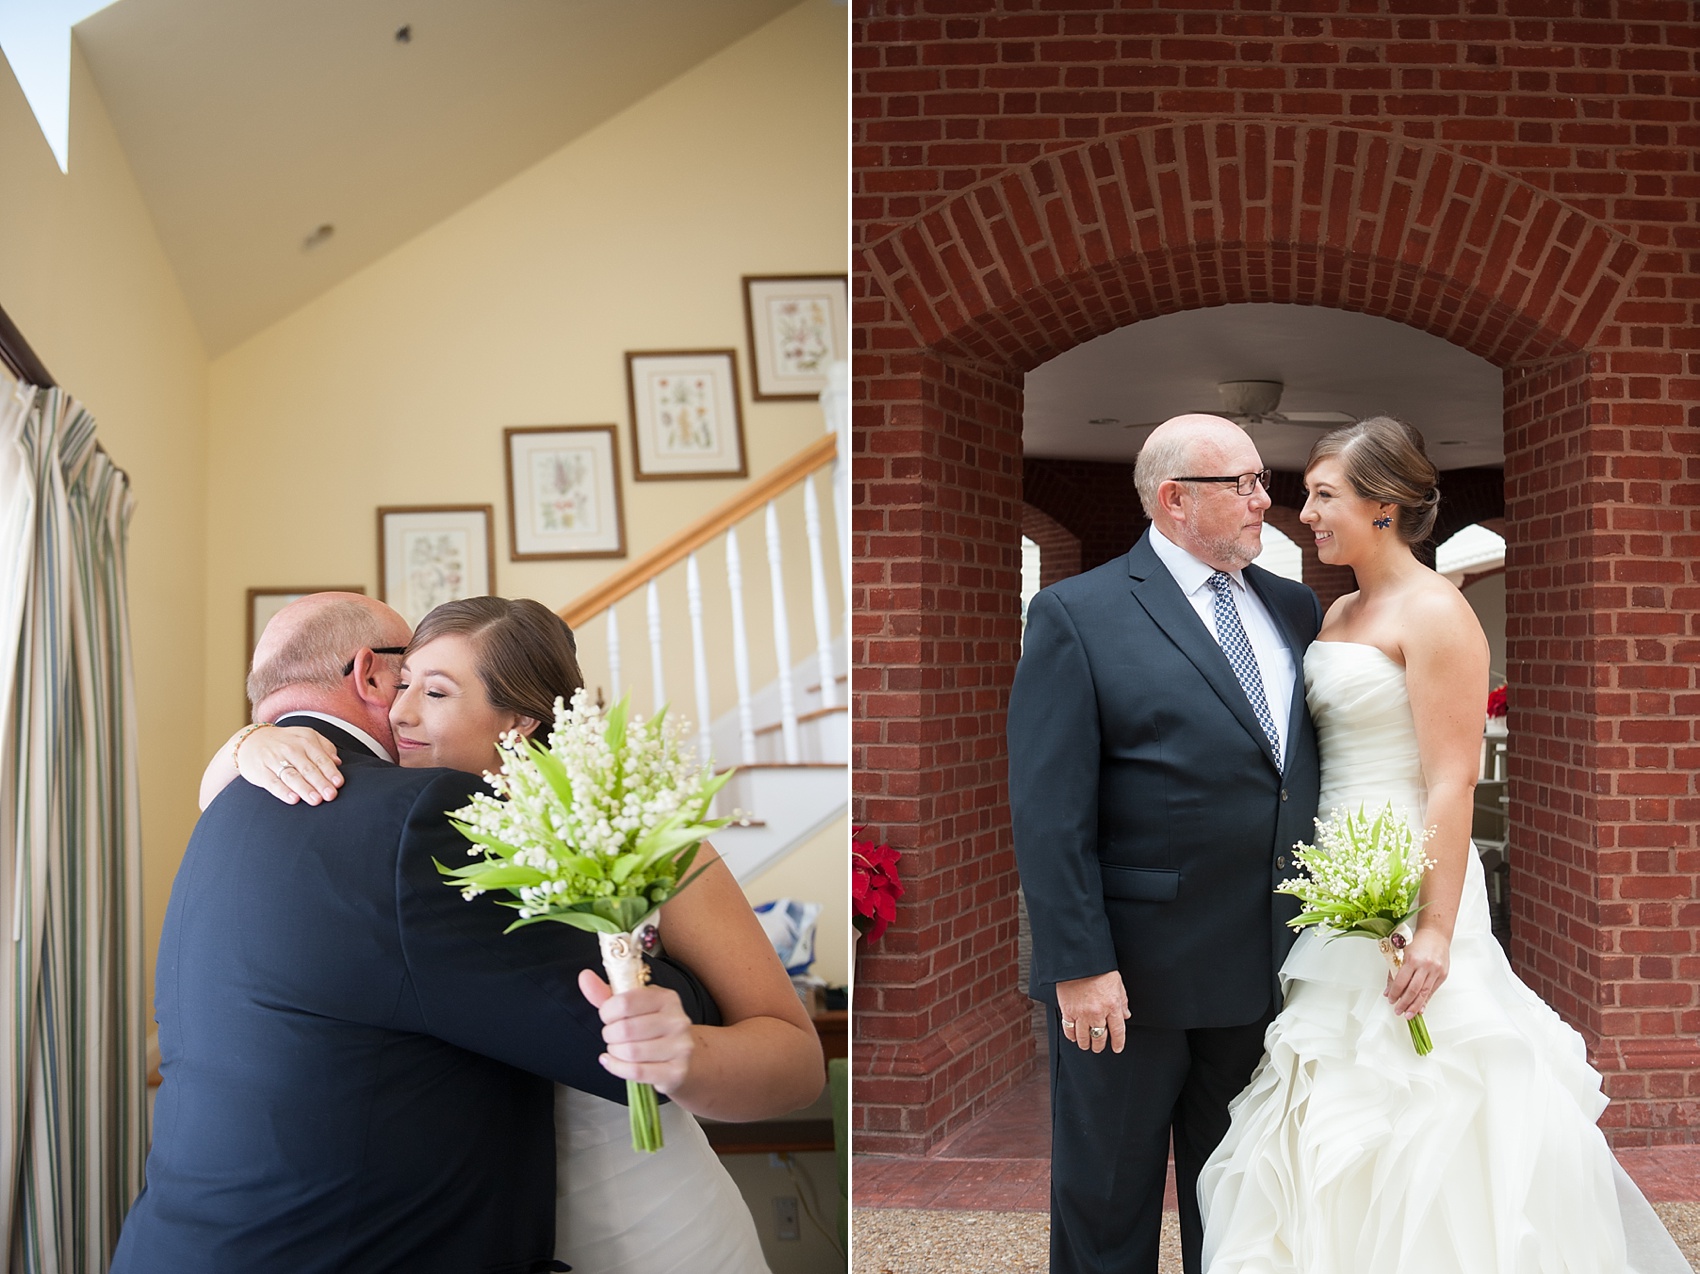 Father of the Bride moments. Images by Mikkel Paige Photographer. #fathersday #fatherofthebride